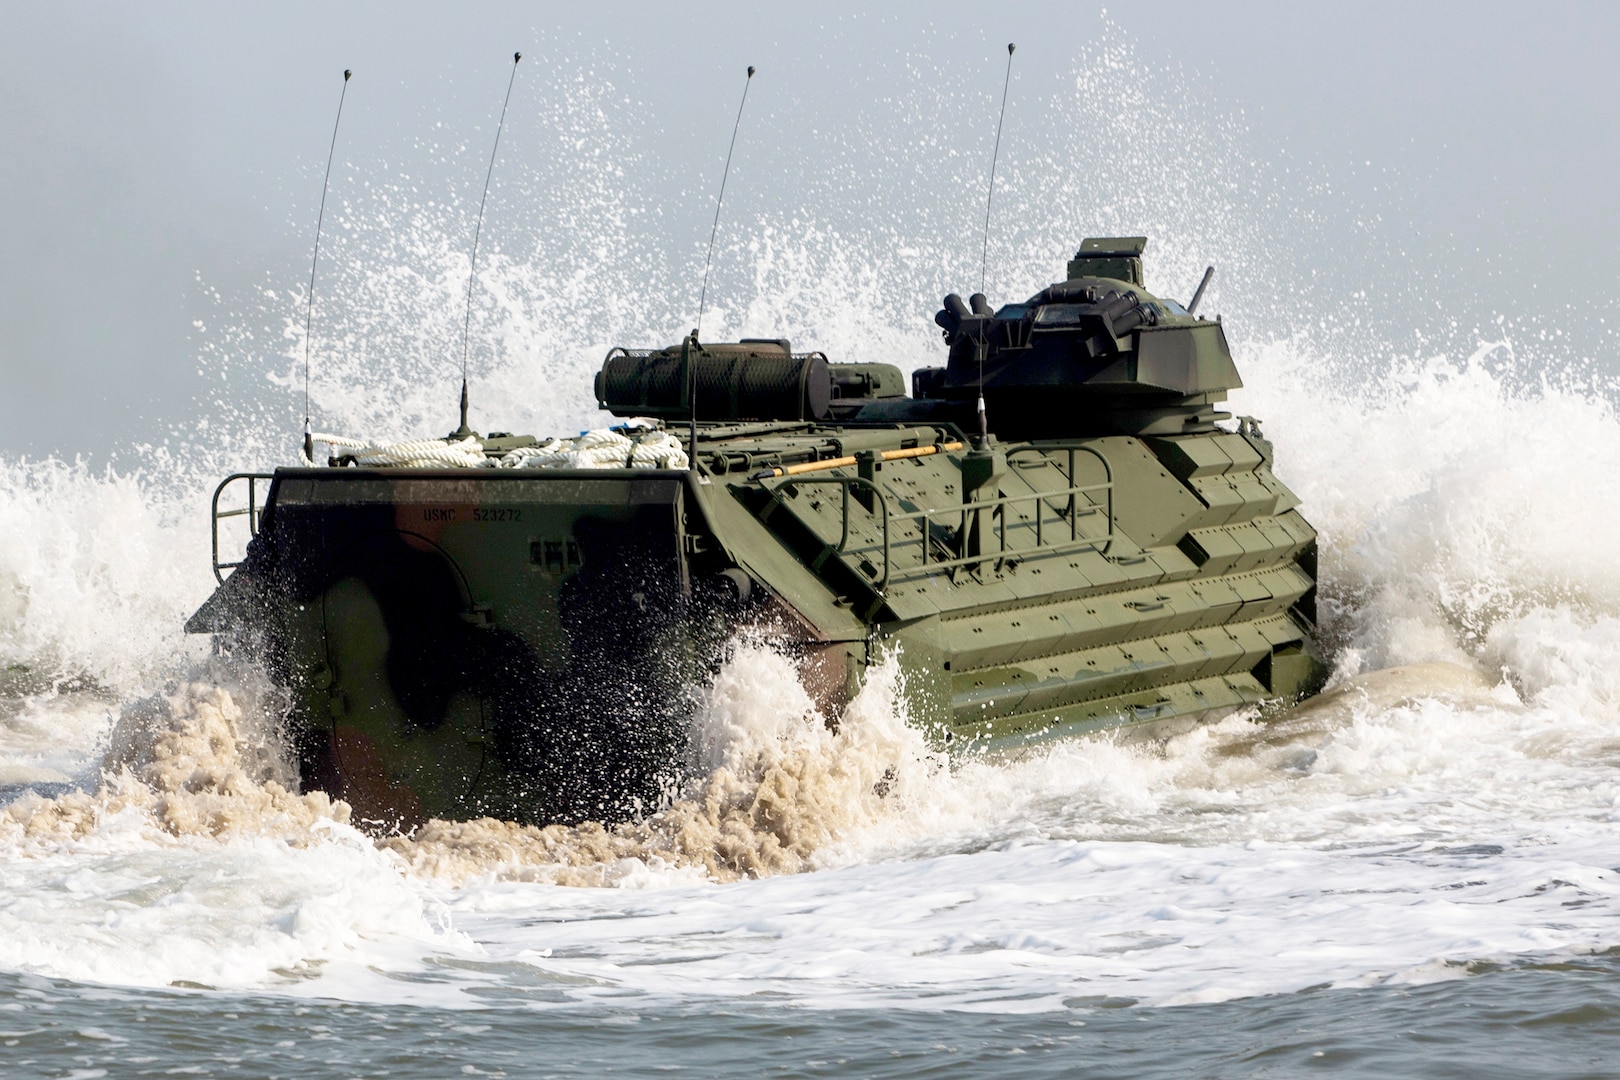 U.S. Marines with the 4th Amphibious Assault Vehicle Battalion take on crashing waves from the shores of Dogu Beach during a training exercise in March 2016. Exercises like this one help warfighters prepare for enemy action and give DLA the chance to rehearse logistics support.